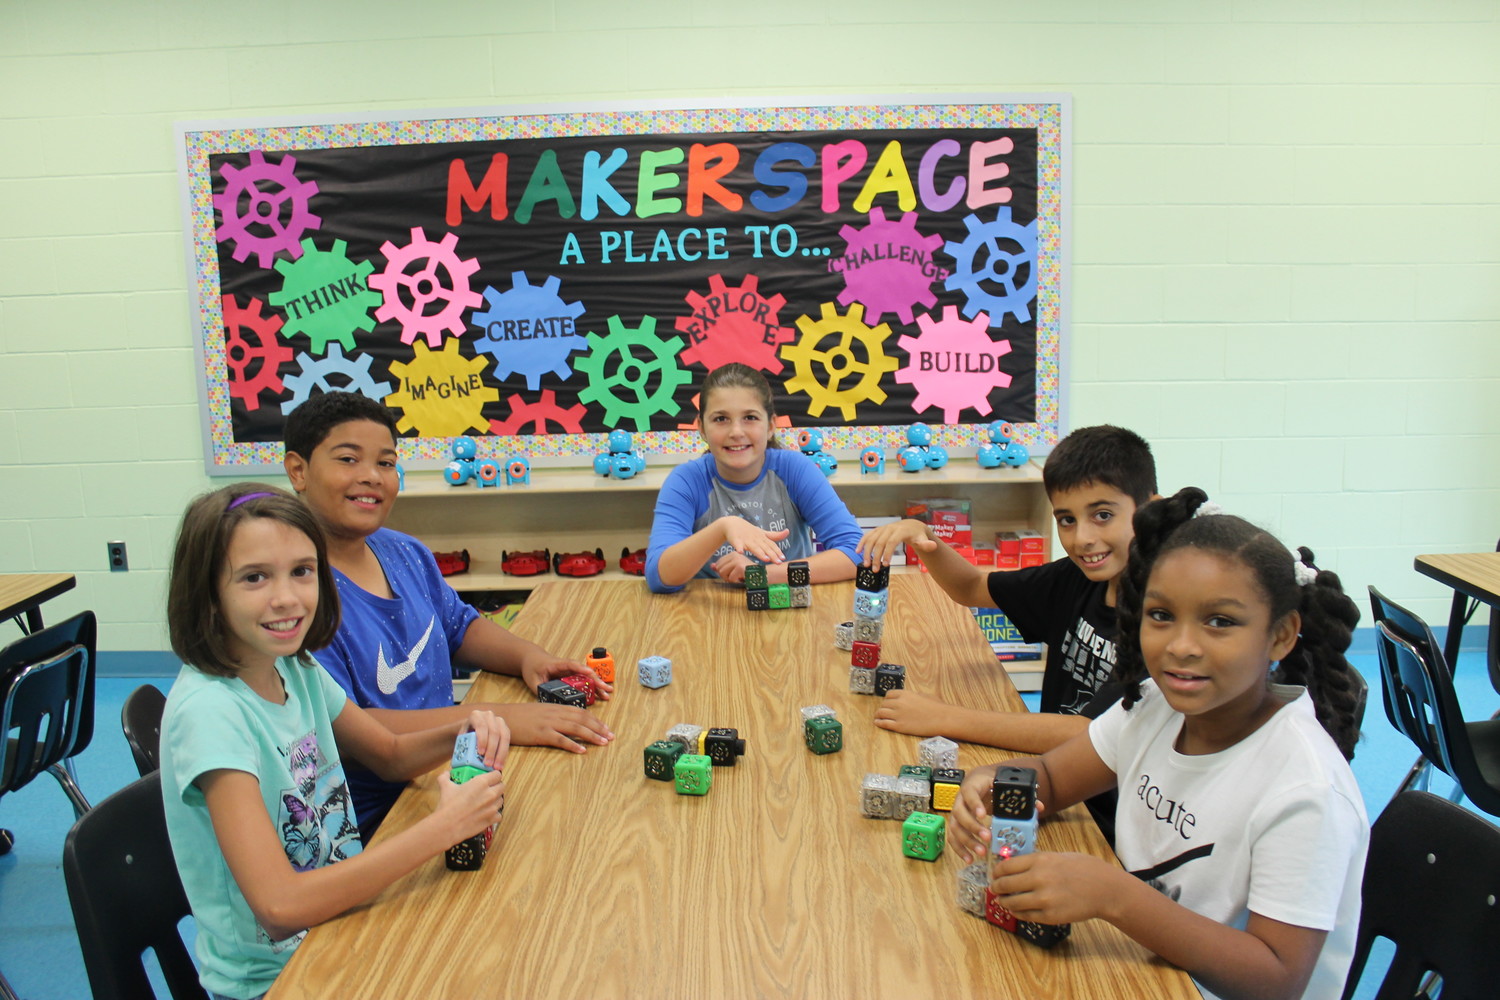 Students Mae Slade, left, Jayden Johnson, Anna Calabrese, Robert Griffo and Aliyah Lewis investigated Cubelet robots in Watson’s new makerspace.